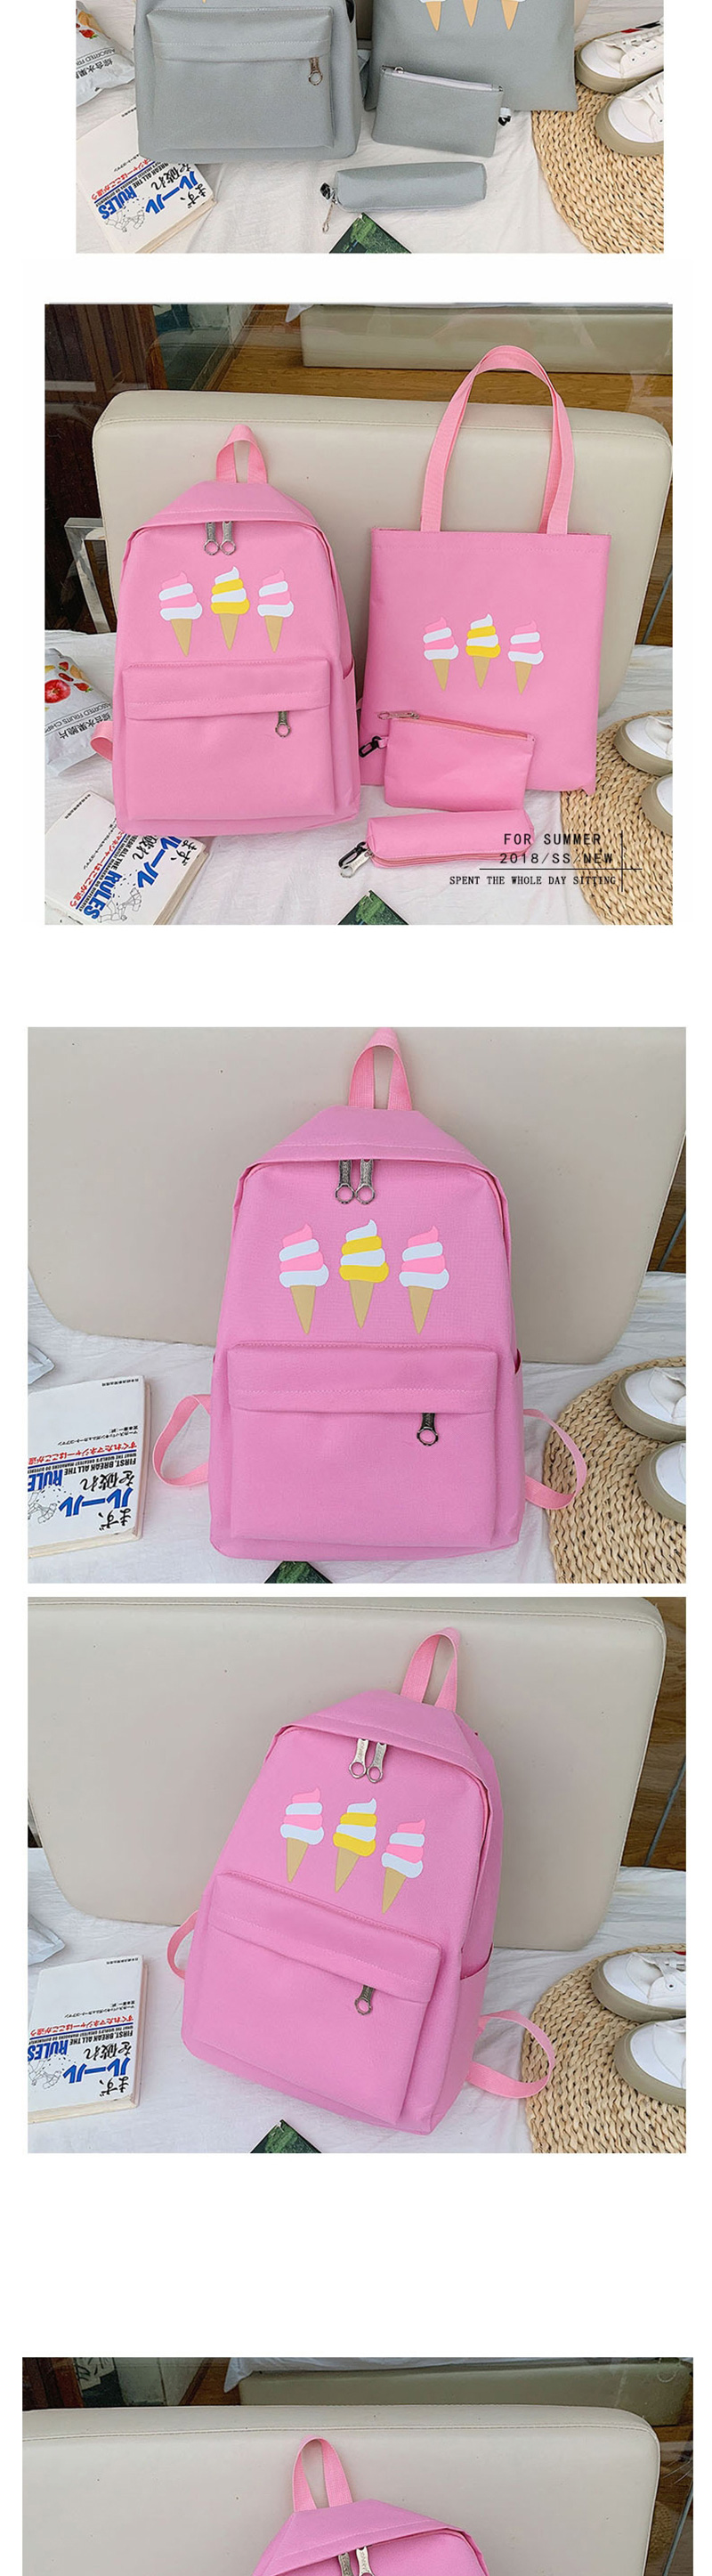 Fashion Yellow Ice Cream Print Backpack Four-piece,Backpack